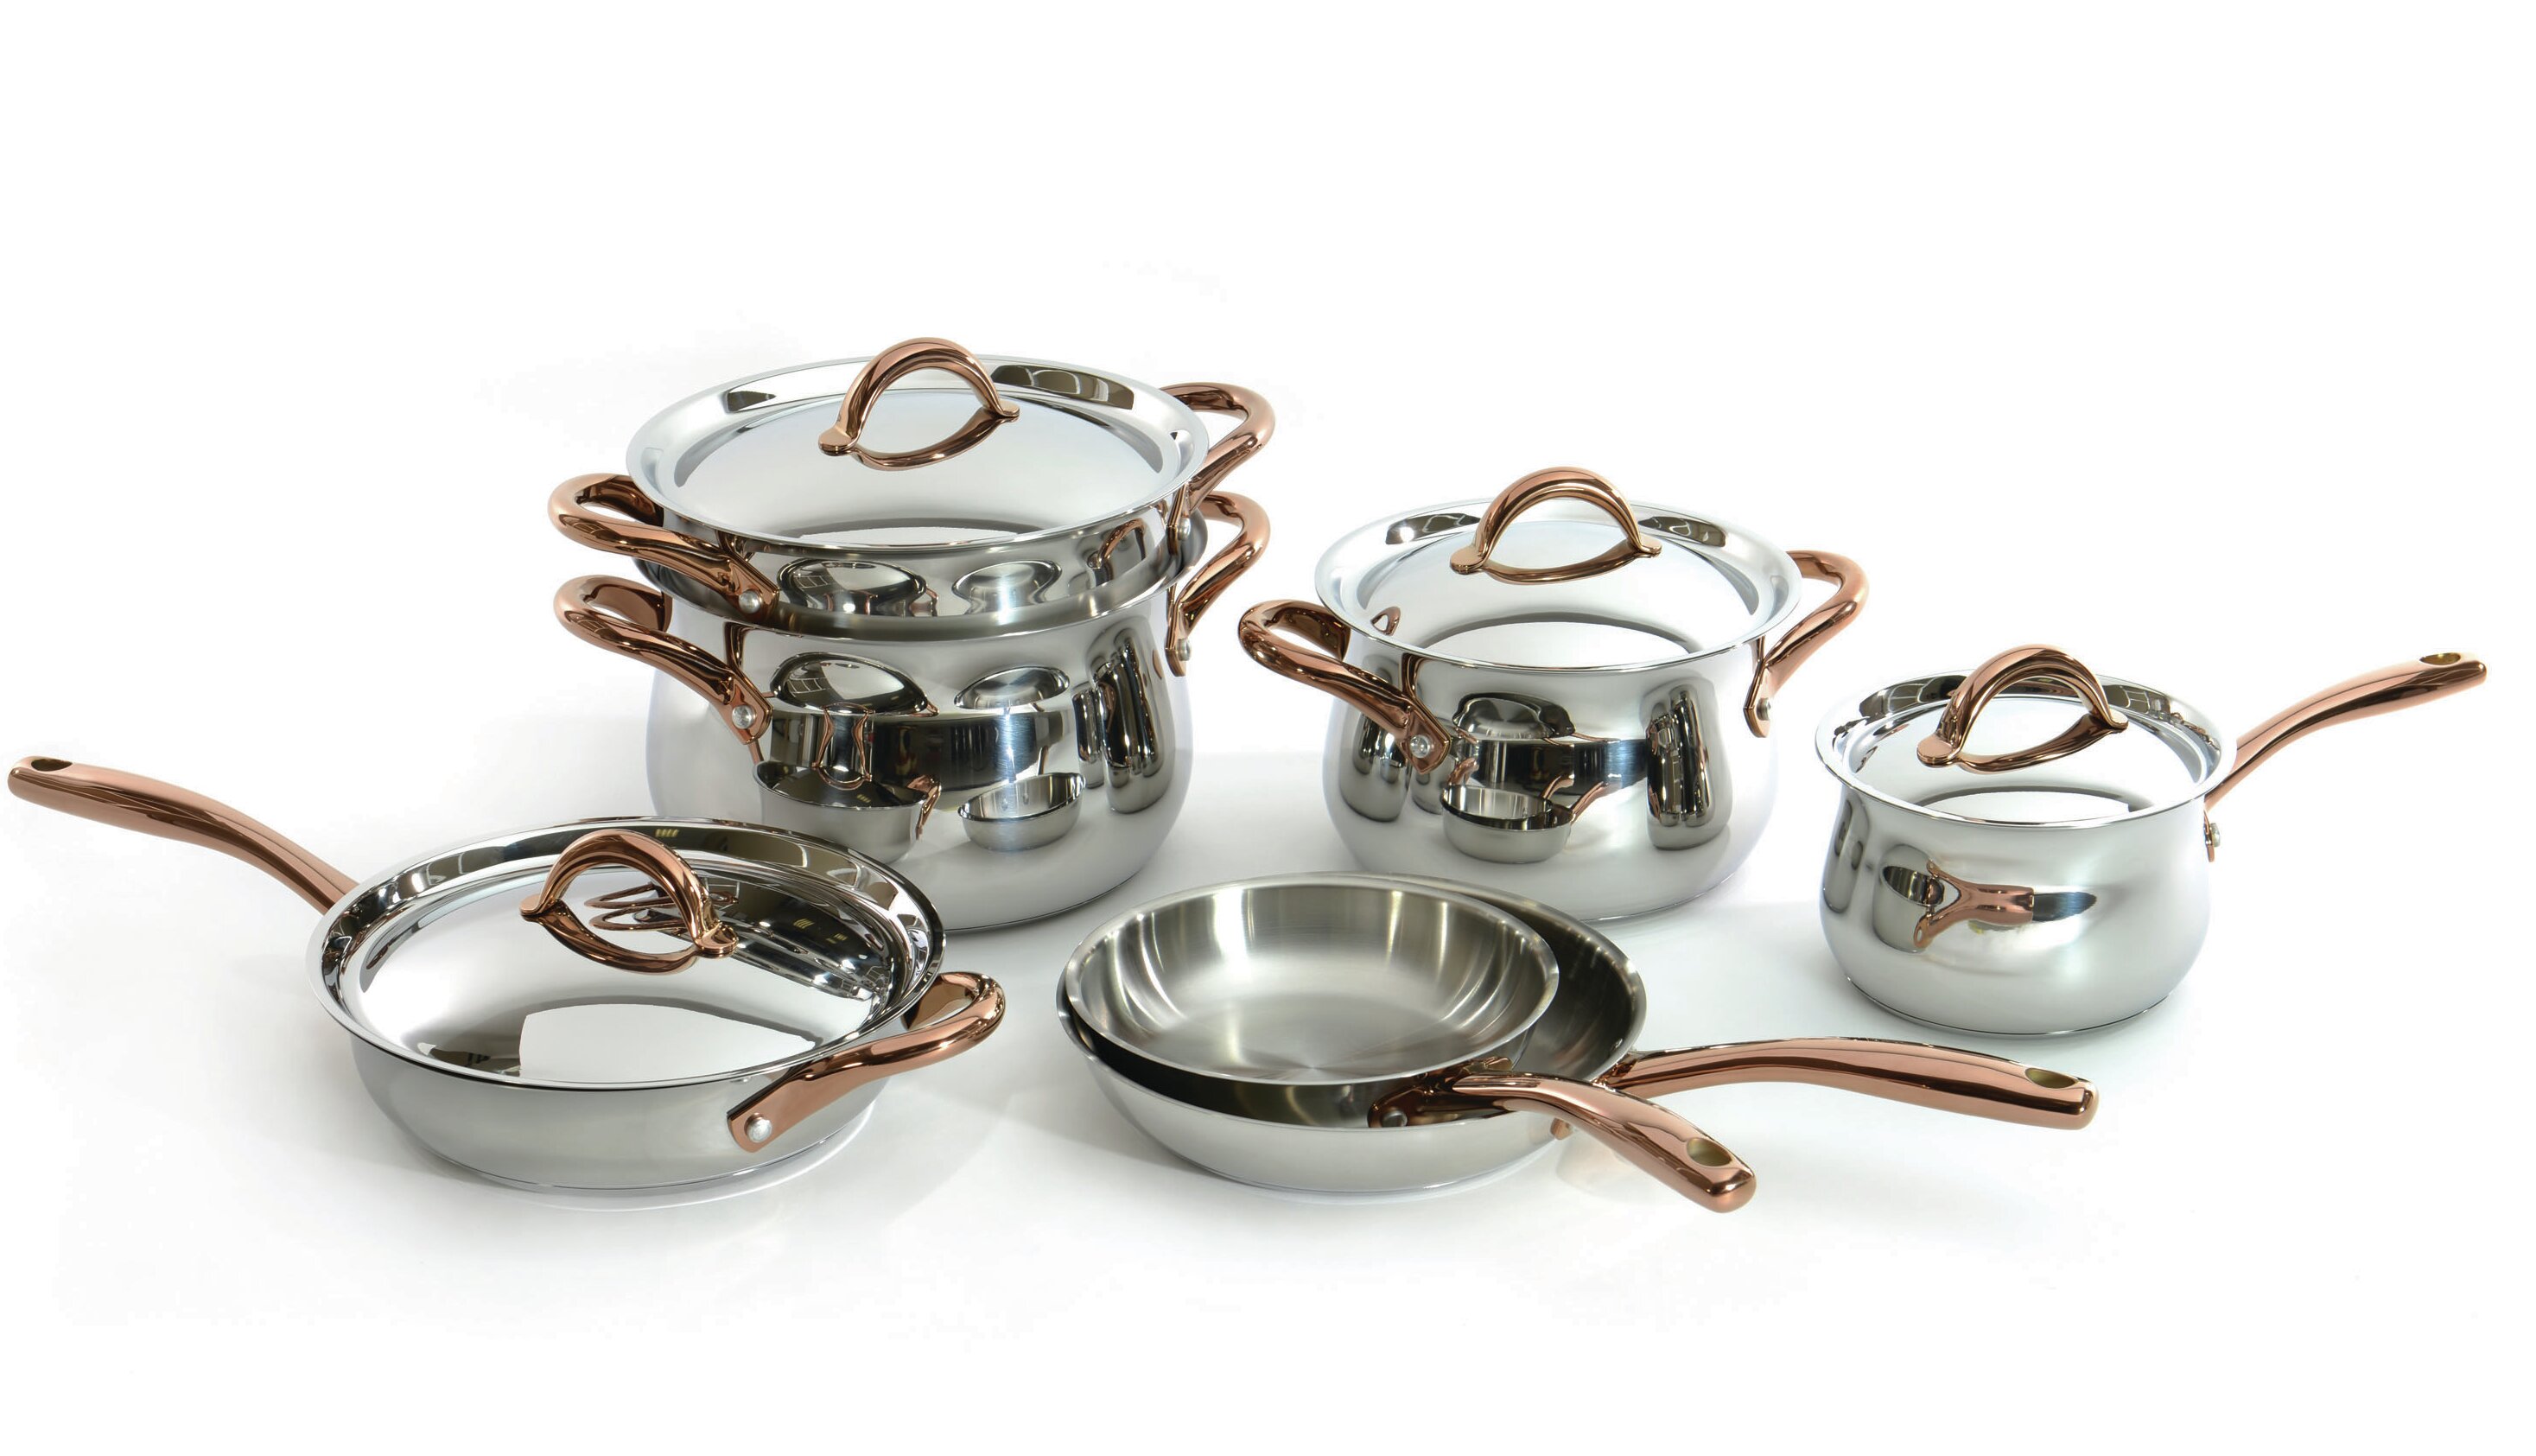 13-Piece Non-Stick Ceramic Cookware Set with Stainless Steel Handles - Rose Gold